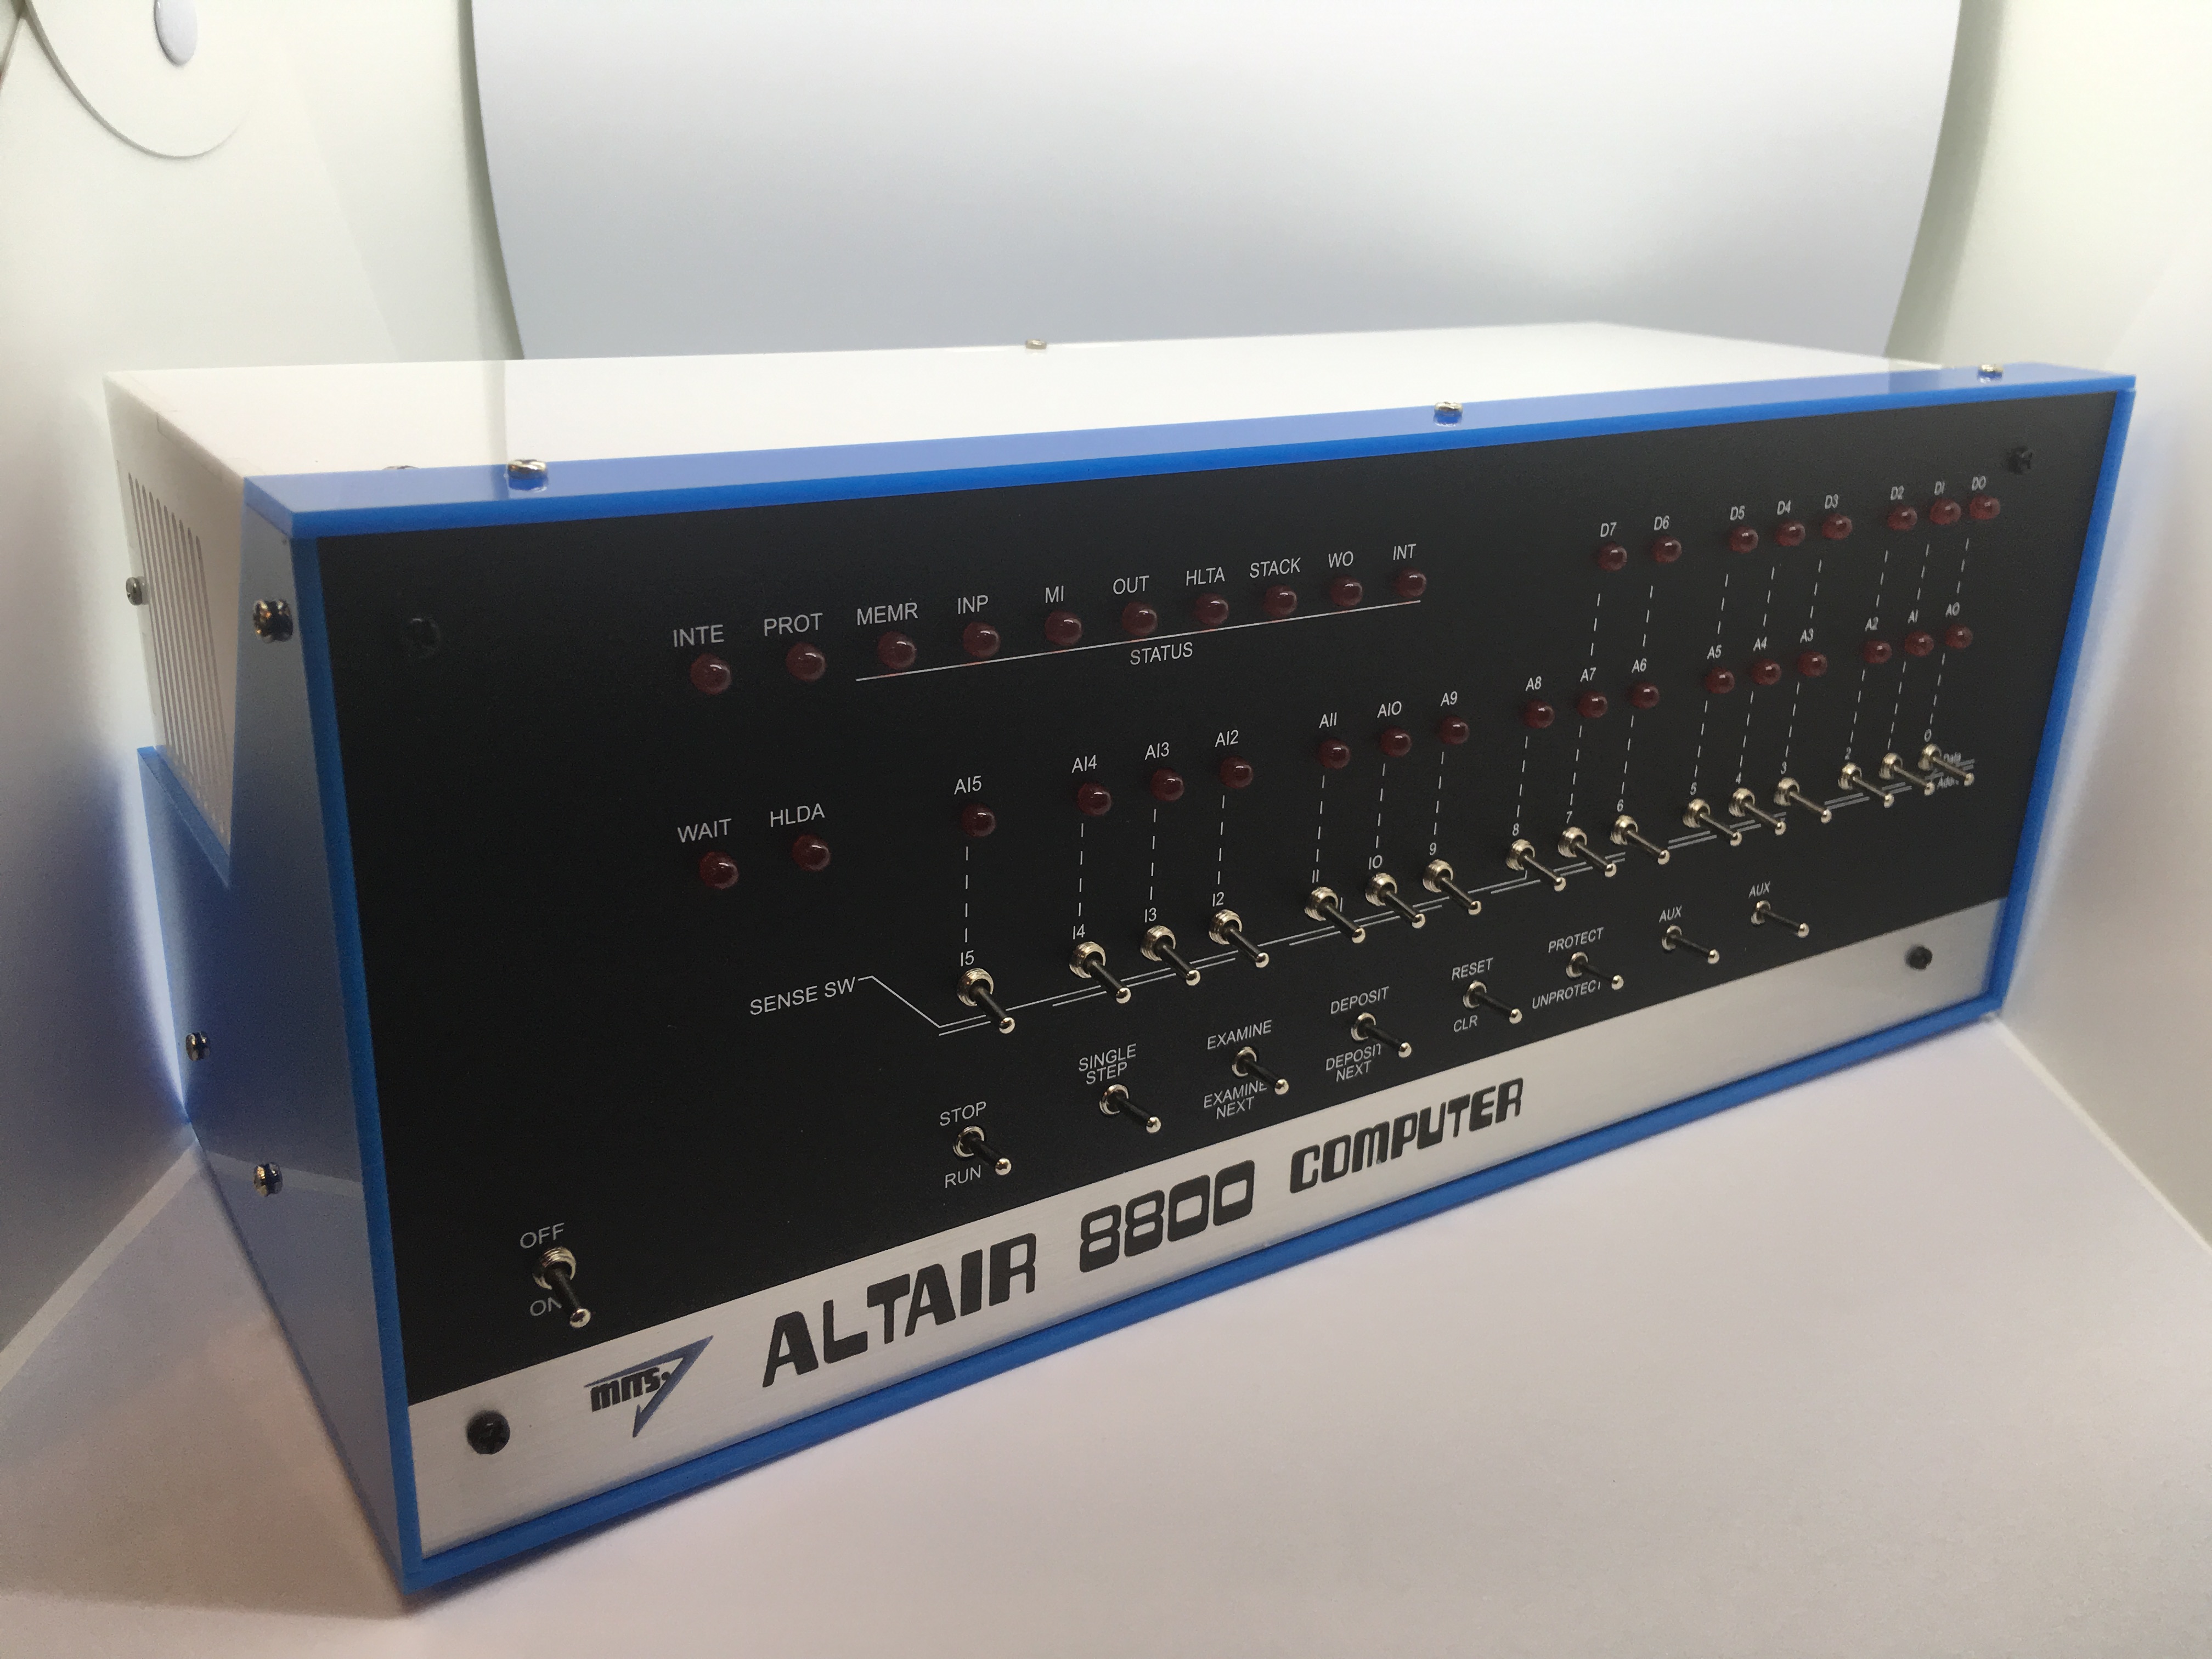 The Pro version of the Altair-Duino kit.